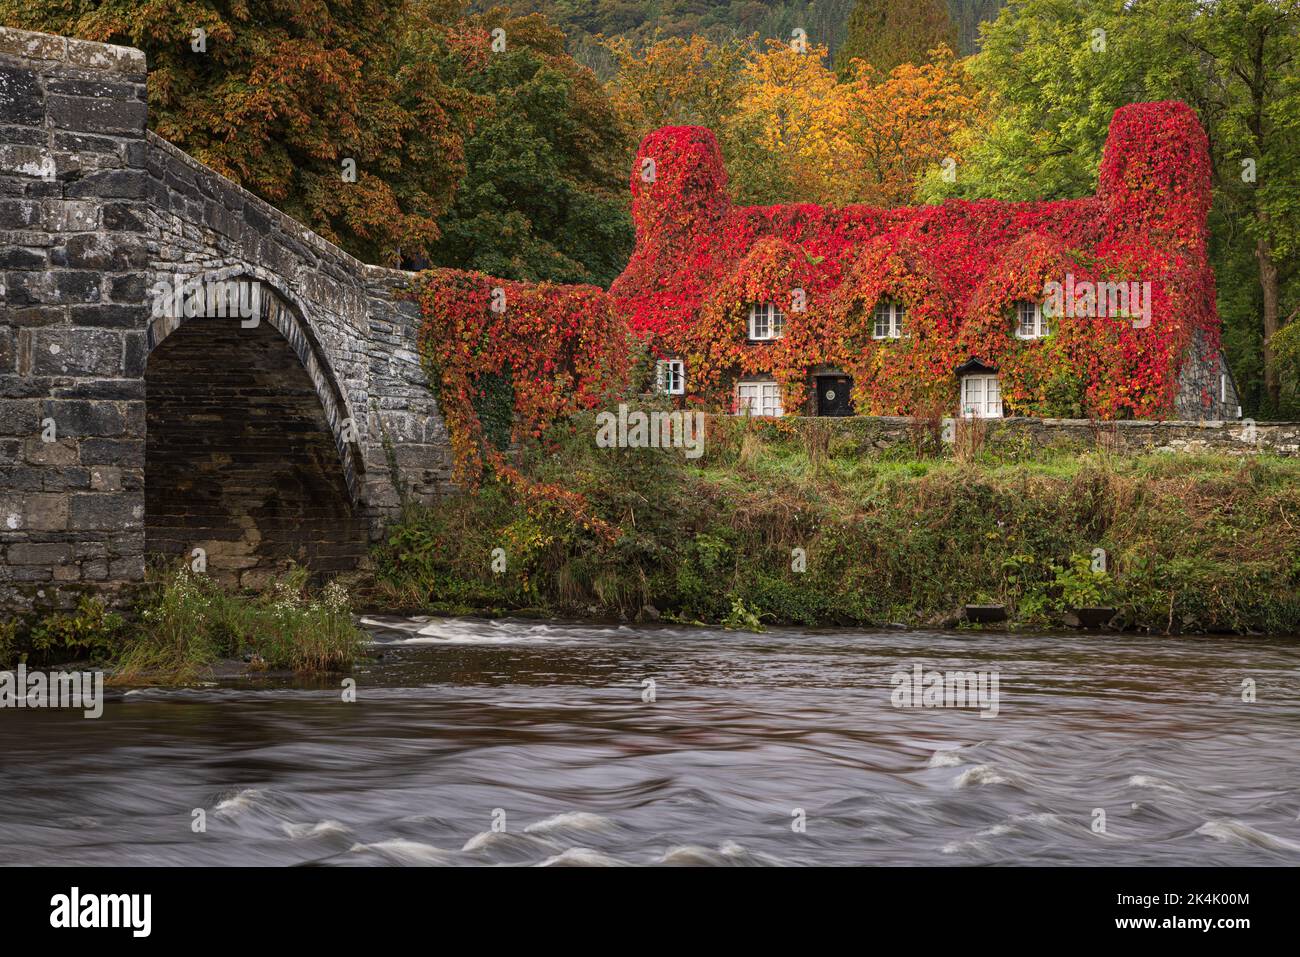 The famous tea room at Llanrwst. There is a window of around four days when the ivy turns bright red before falling off. Stock Photo